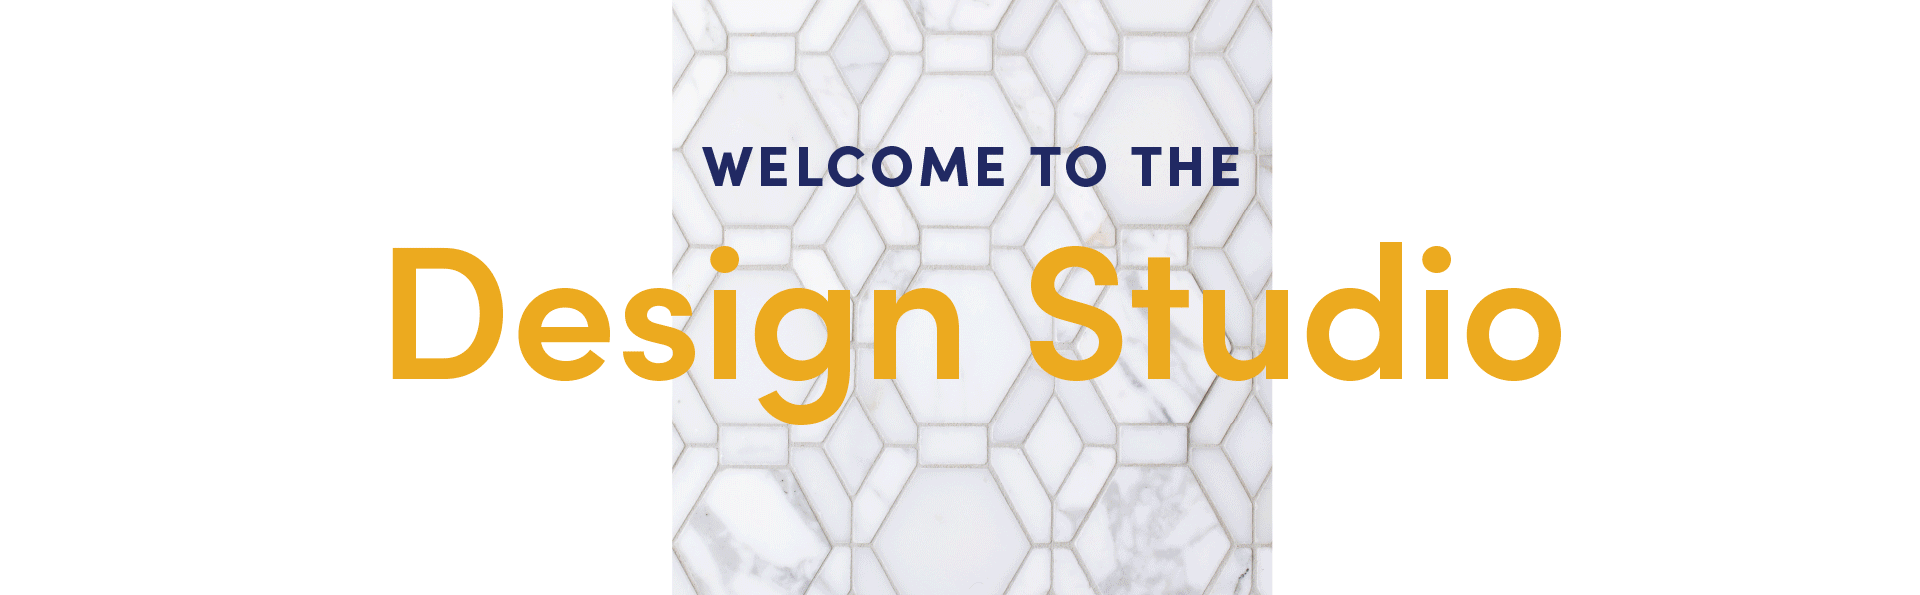 Welcome To The Design Studio